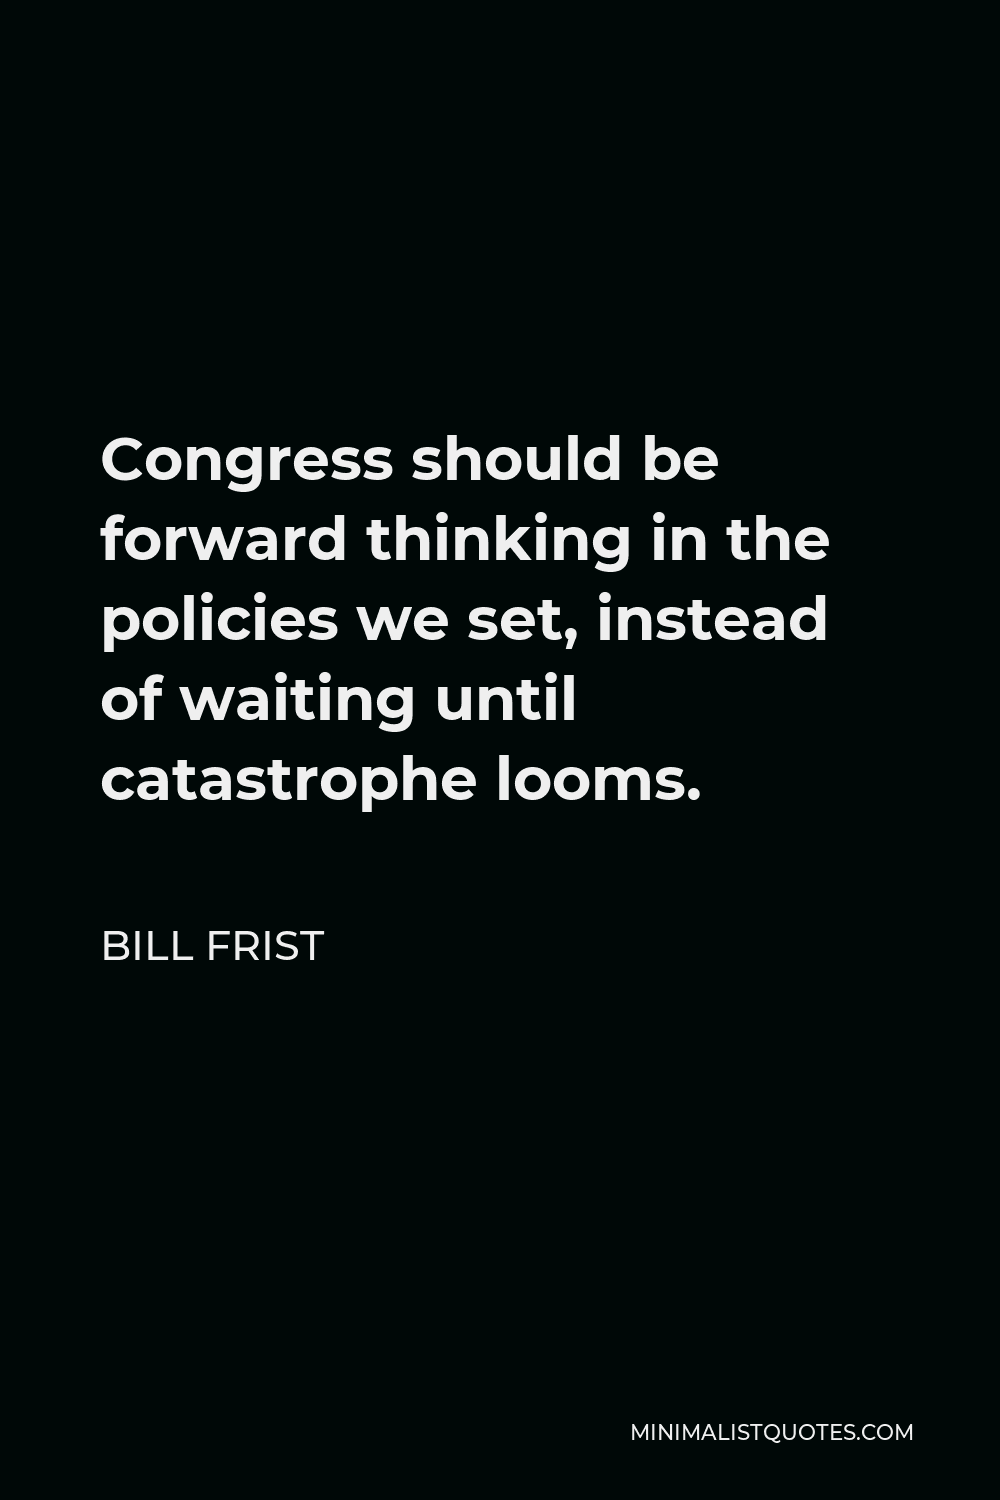 Bill Frist Quote - Congress should be forward thinking in the policies we set, instead of waiting until catastrophe looms.